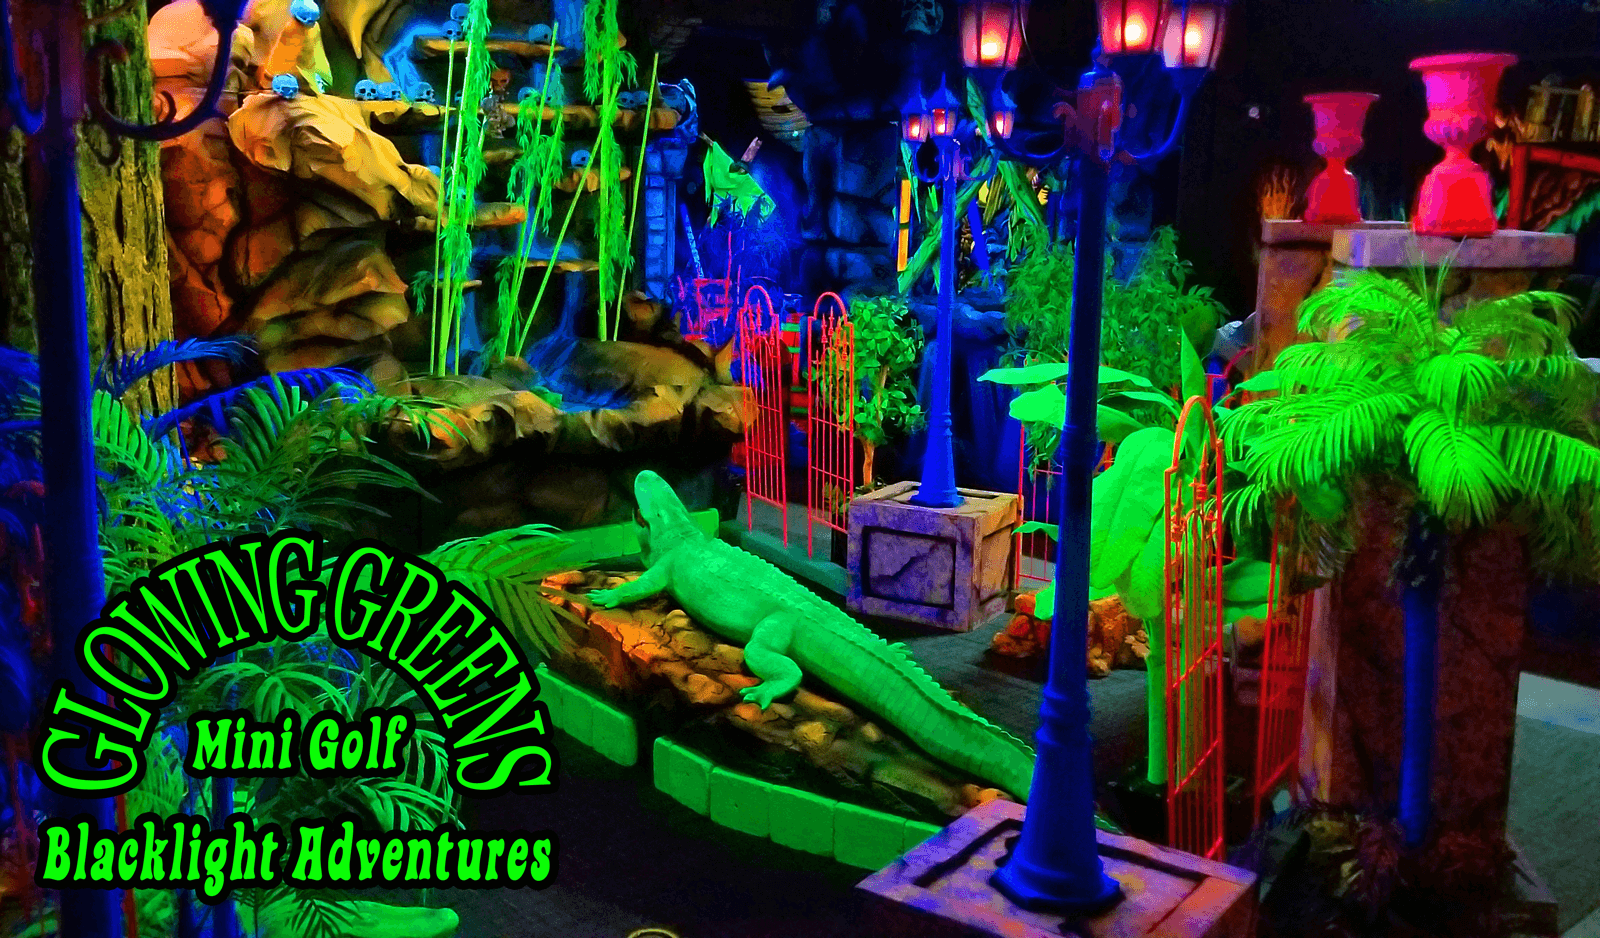 This Glowing Pirate Mini Golf Course In Oregon Is Truly One-Of-A-Kind